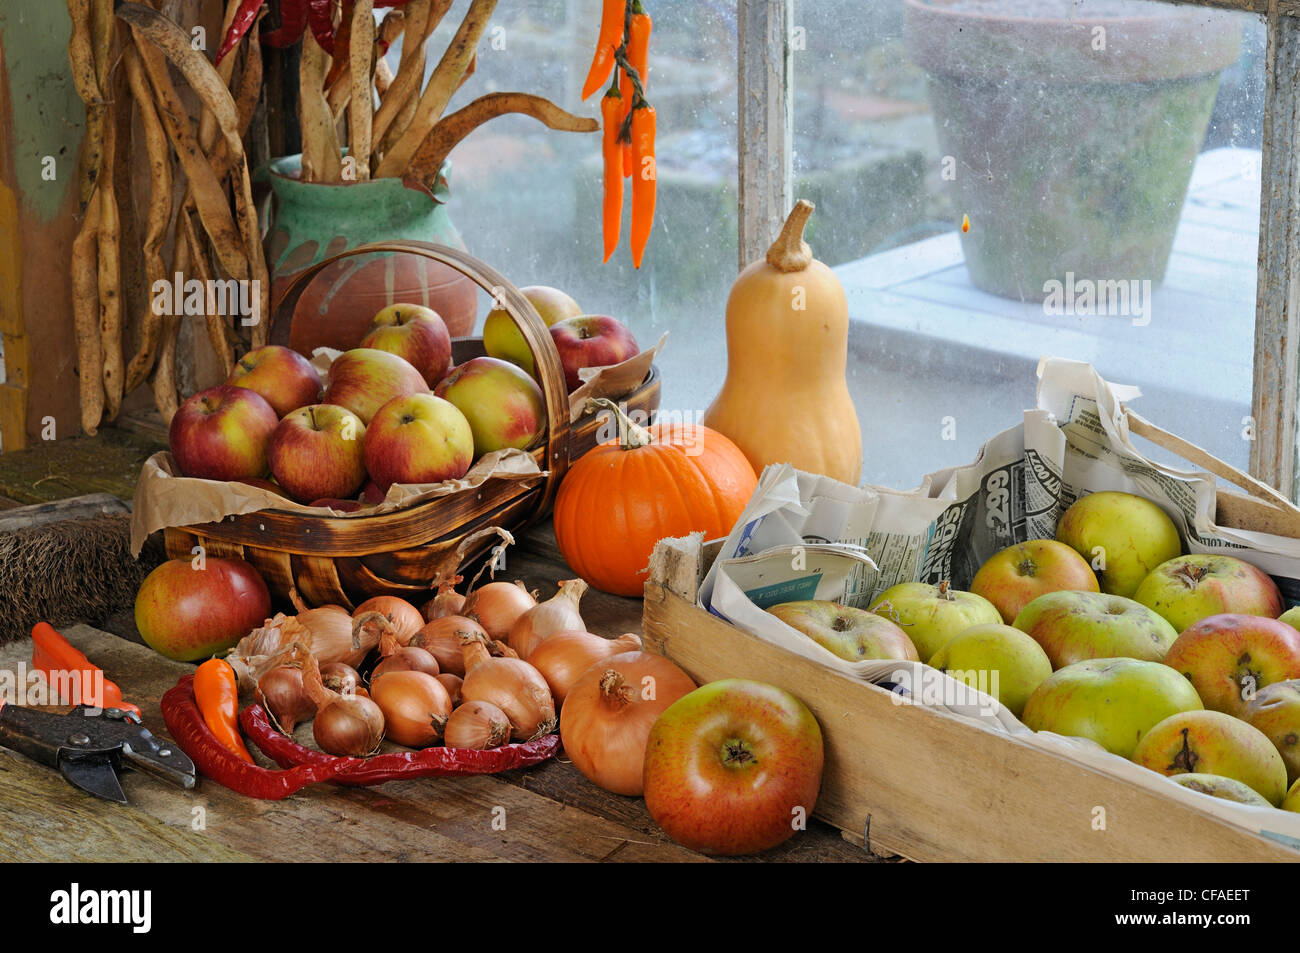 Garden potting shed bench in autumn with stored apples, runner bean seed, chillies and squashes, UK, October Stock Photo